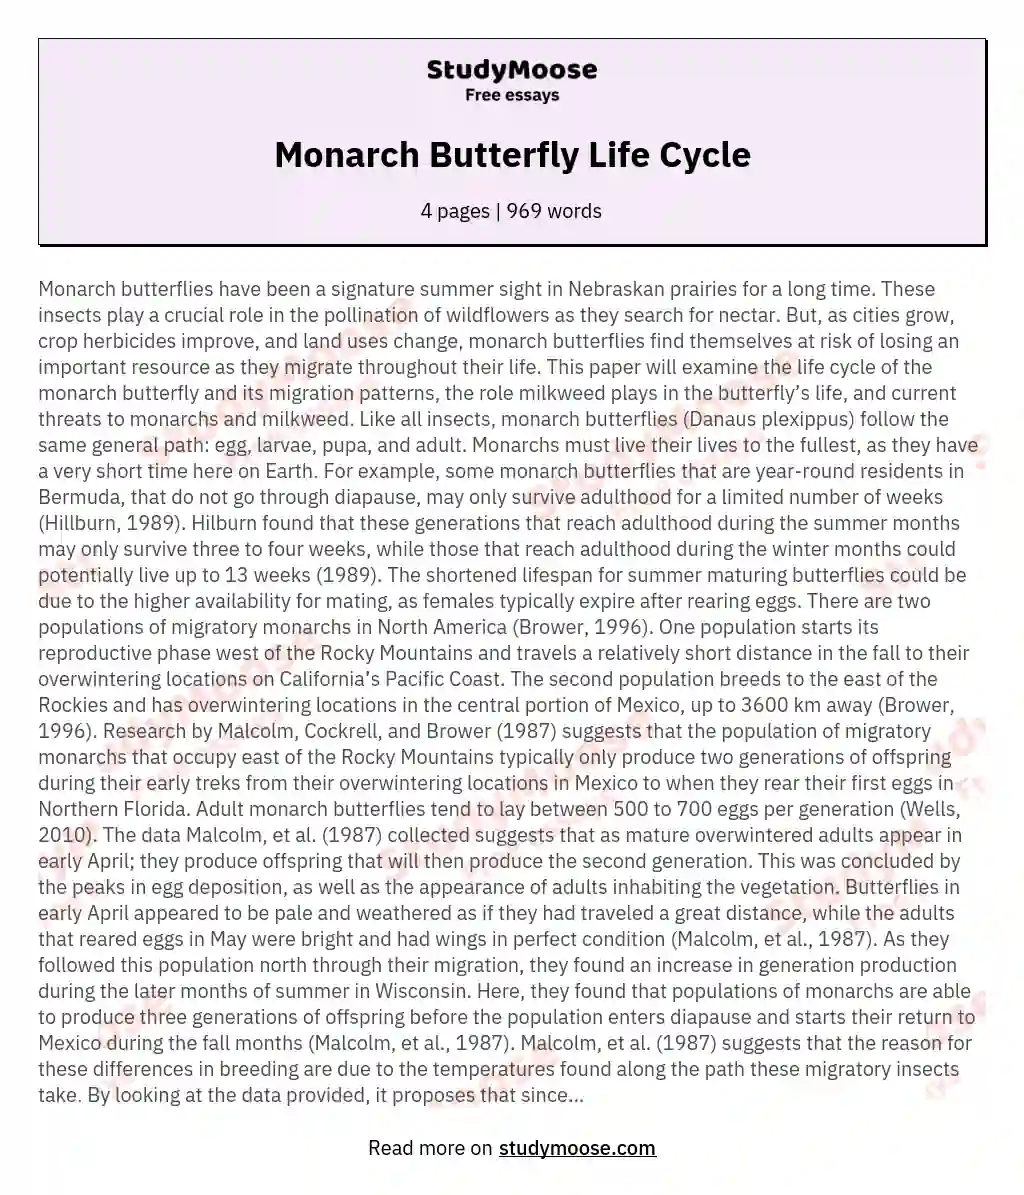 Monarch Butterfly Life Cycle essay